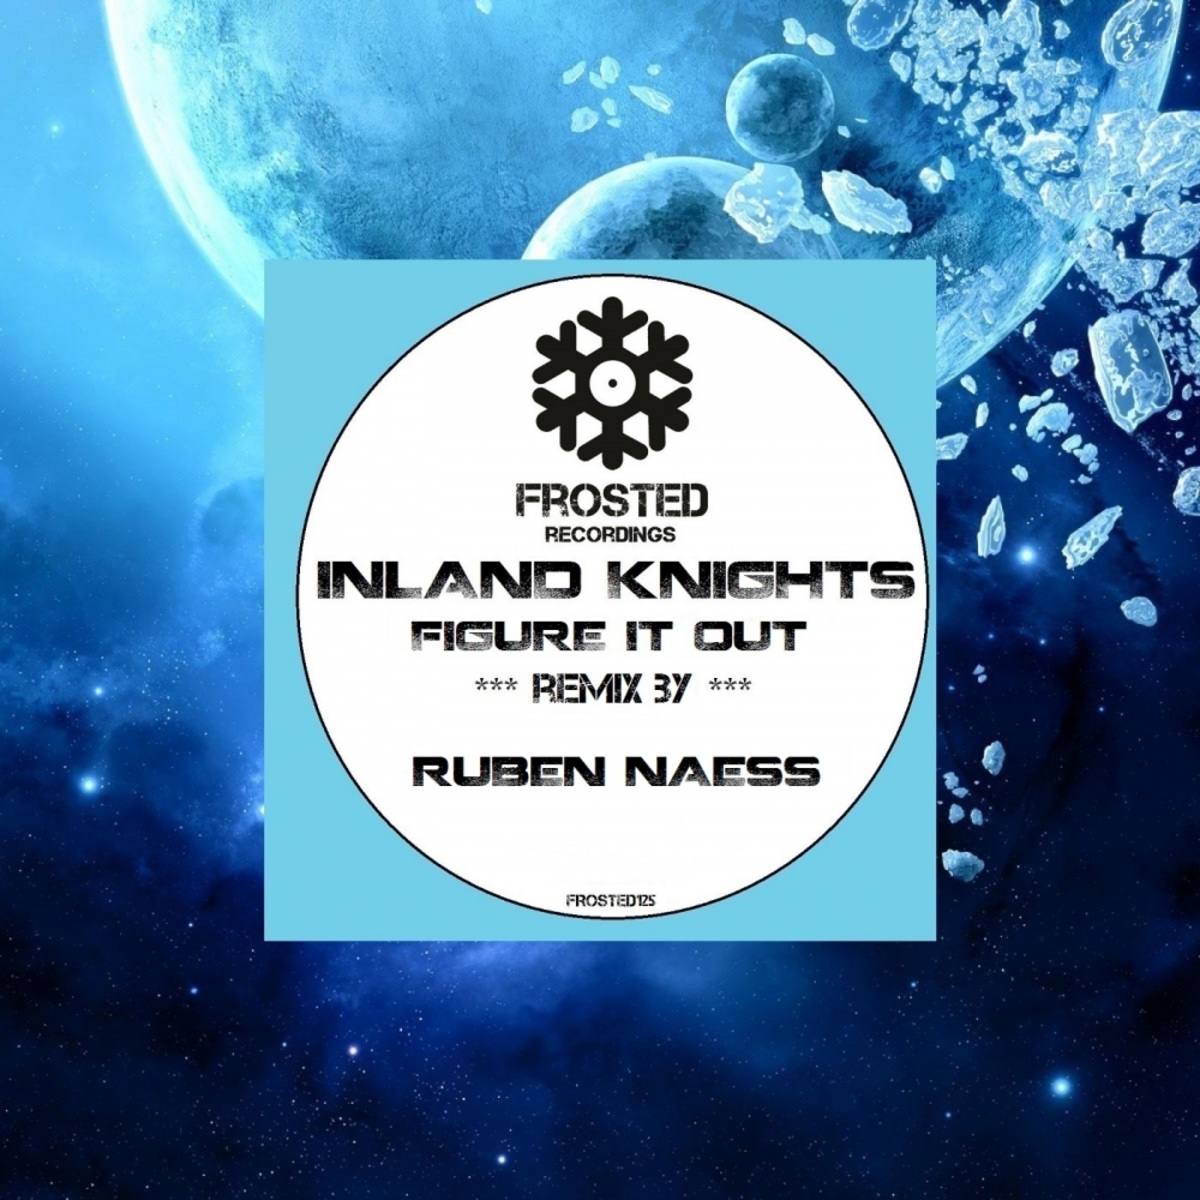 Inland Knights - Figure It Out (Ruben Naess Remix) / Frosted Recordings